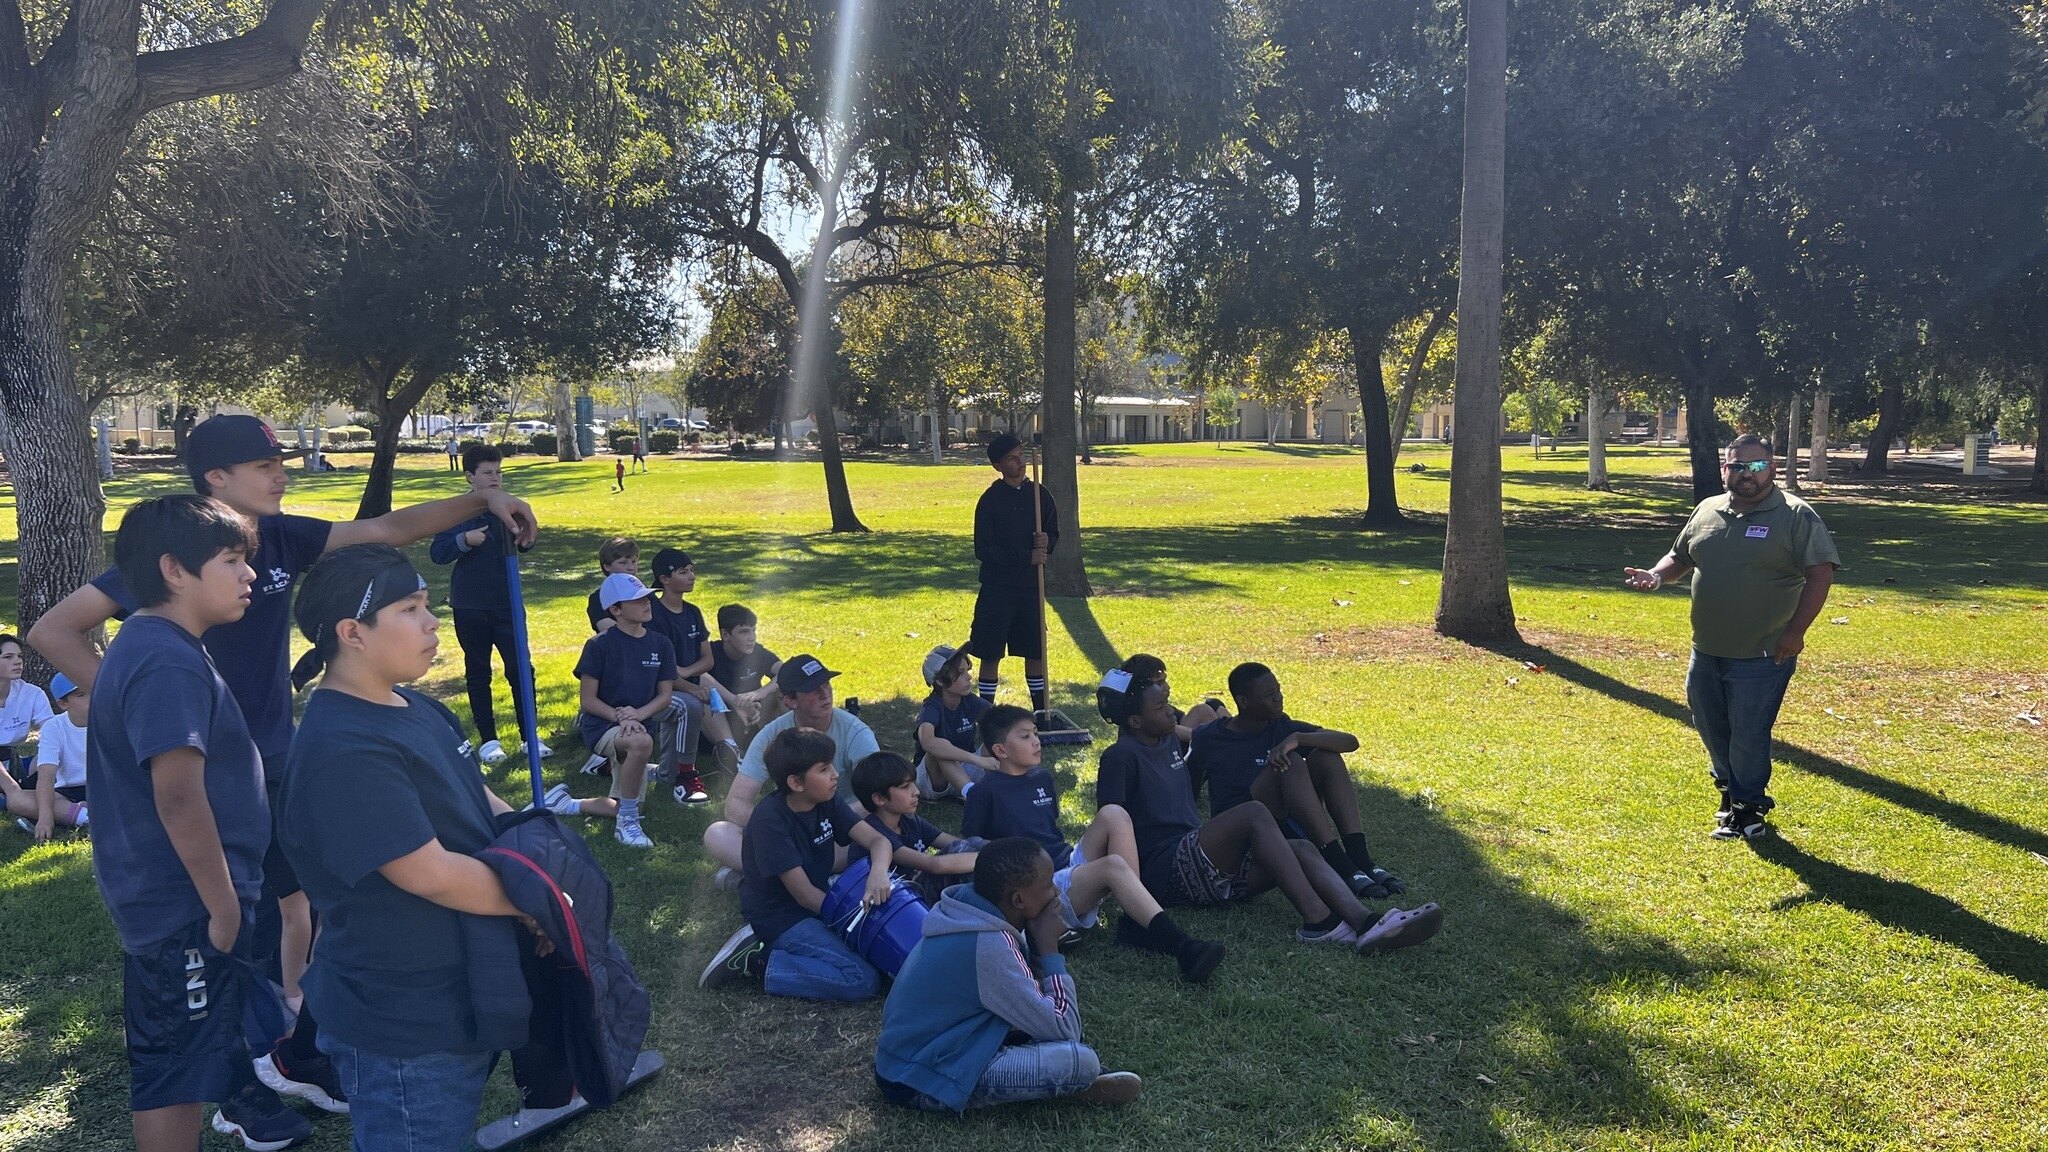 The boys had the amazing opportunity yesterday to visit the Veterans Monument to clean and show respect to the statues and what they mean. Students got to talk Andres from the Veterans of Foreign Wars Post 1513 about the VFW, the monument, and the st